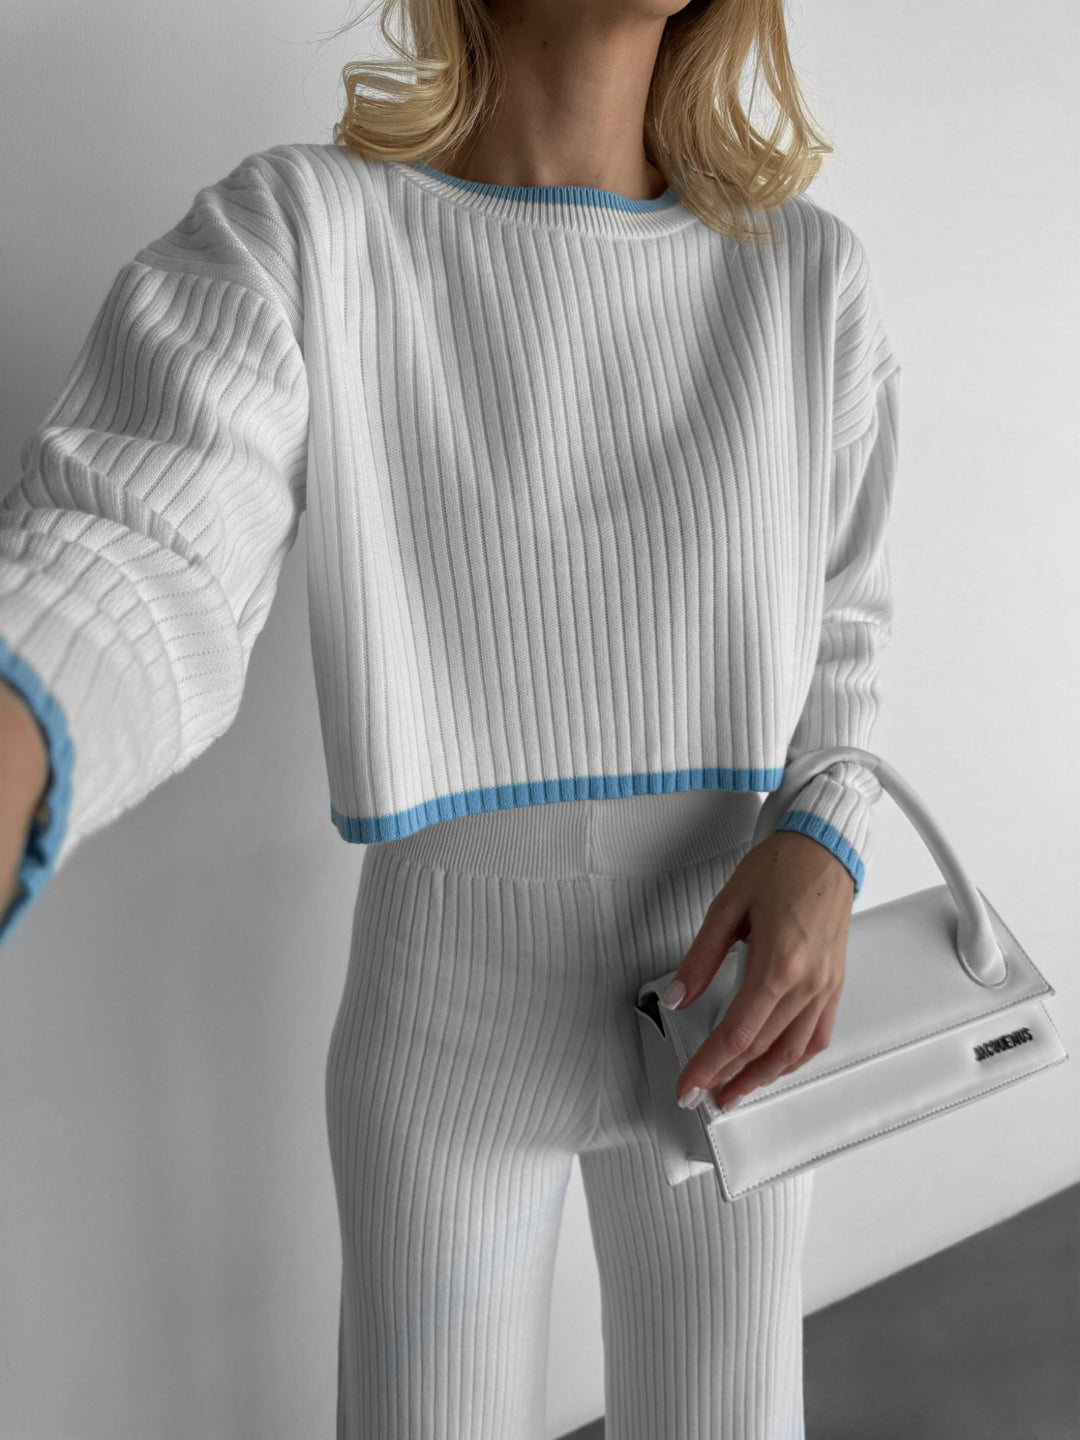 Short Details Knit Pullover - White and Babyblue